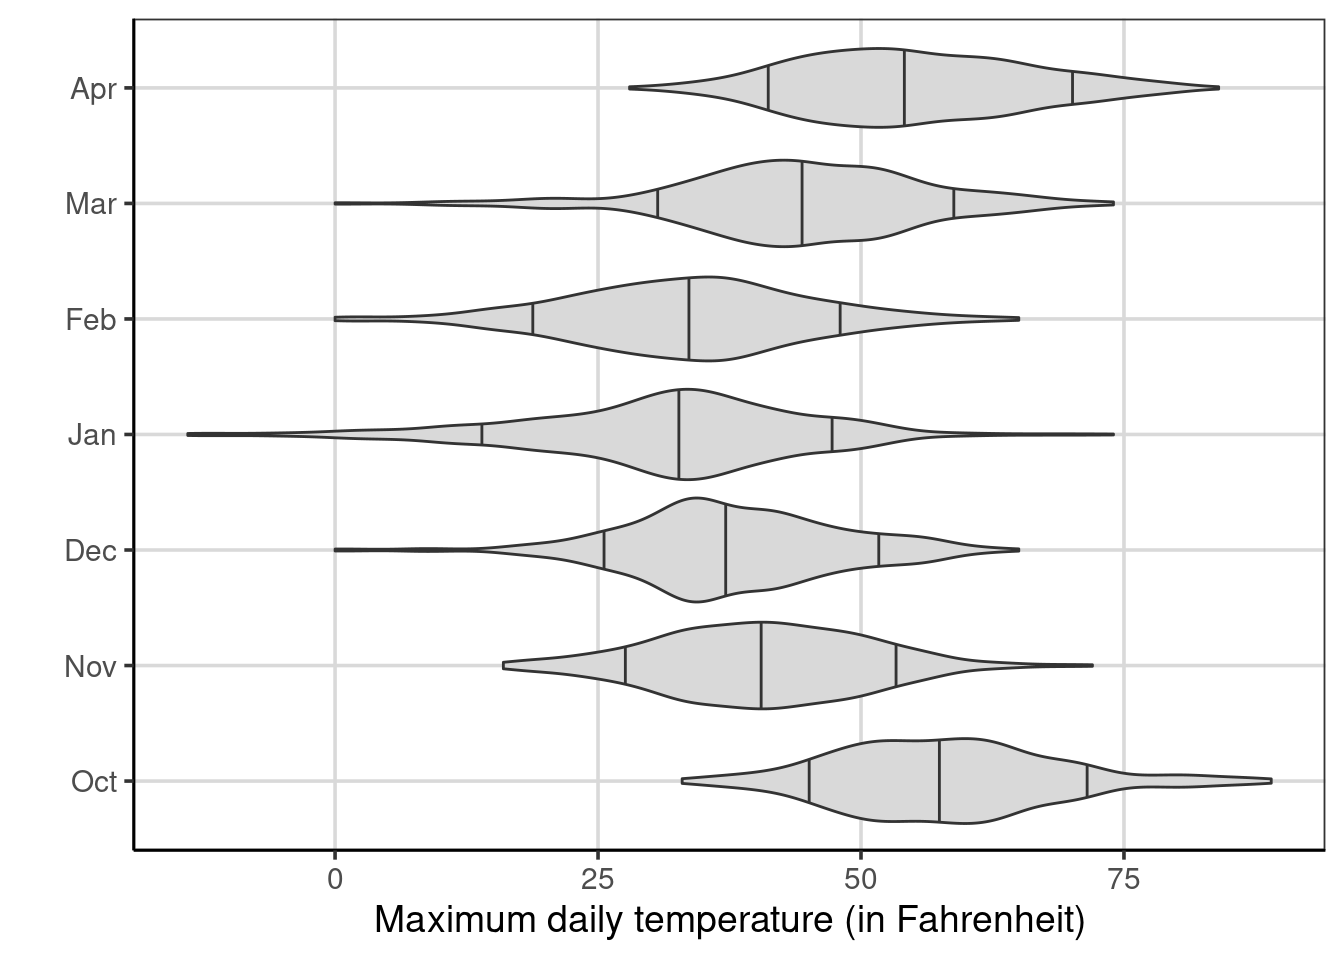 Violin plots of the maximum temperature by month of the year